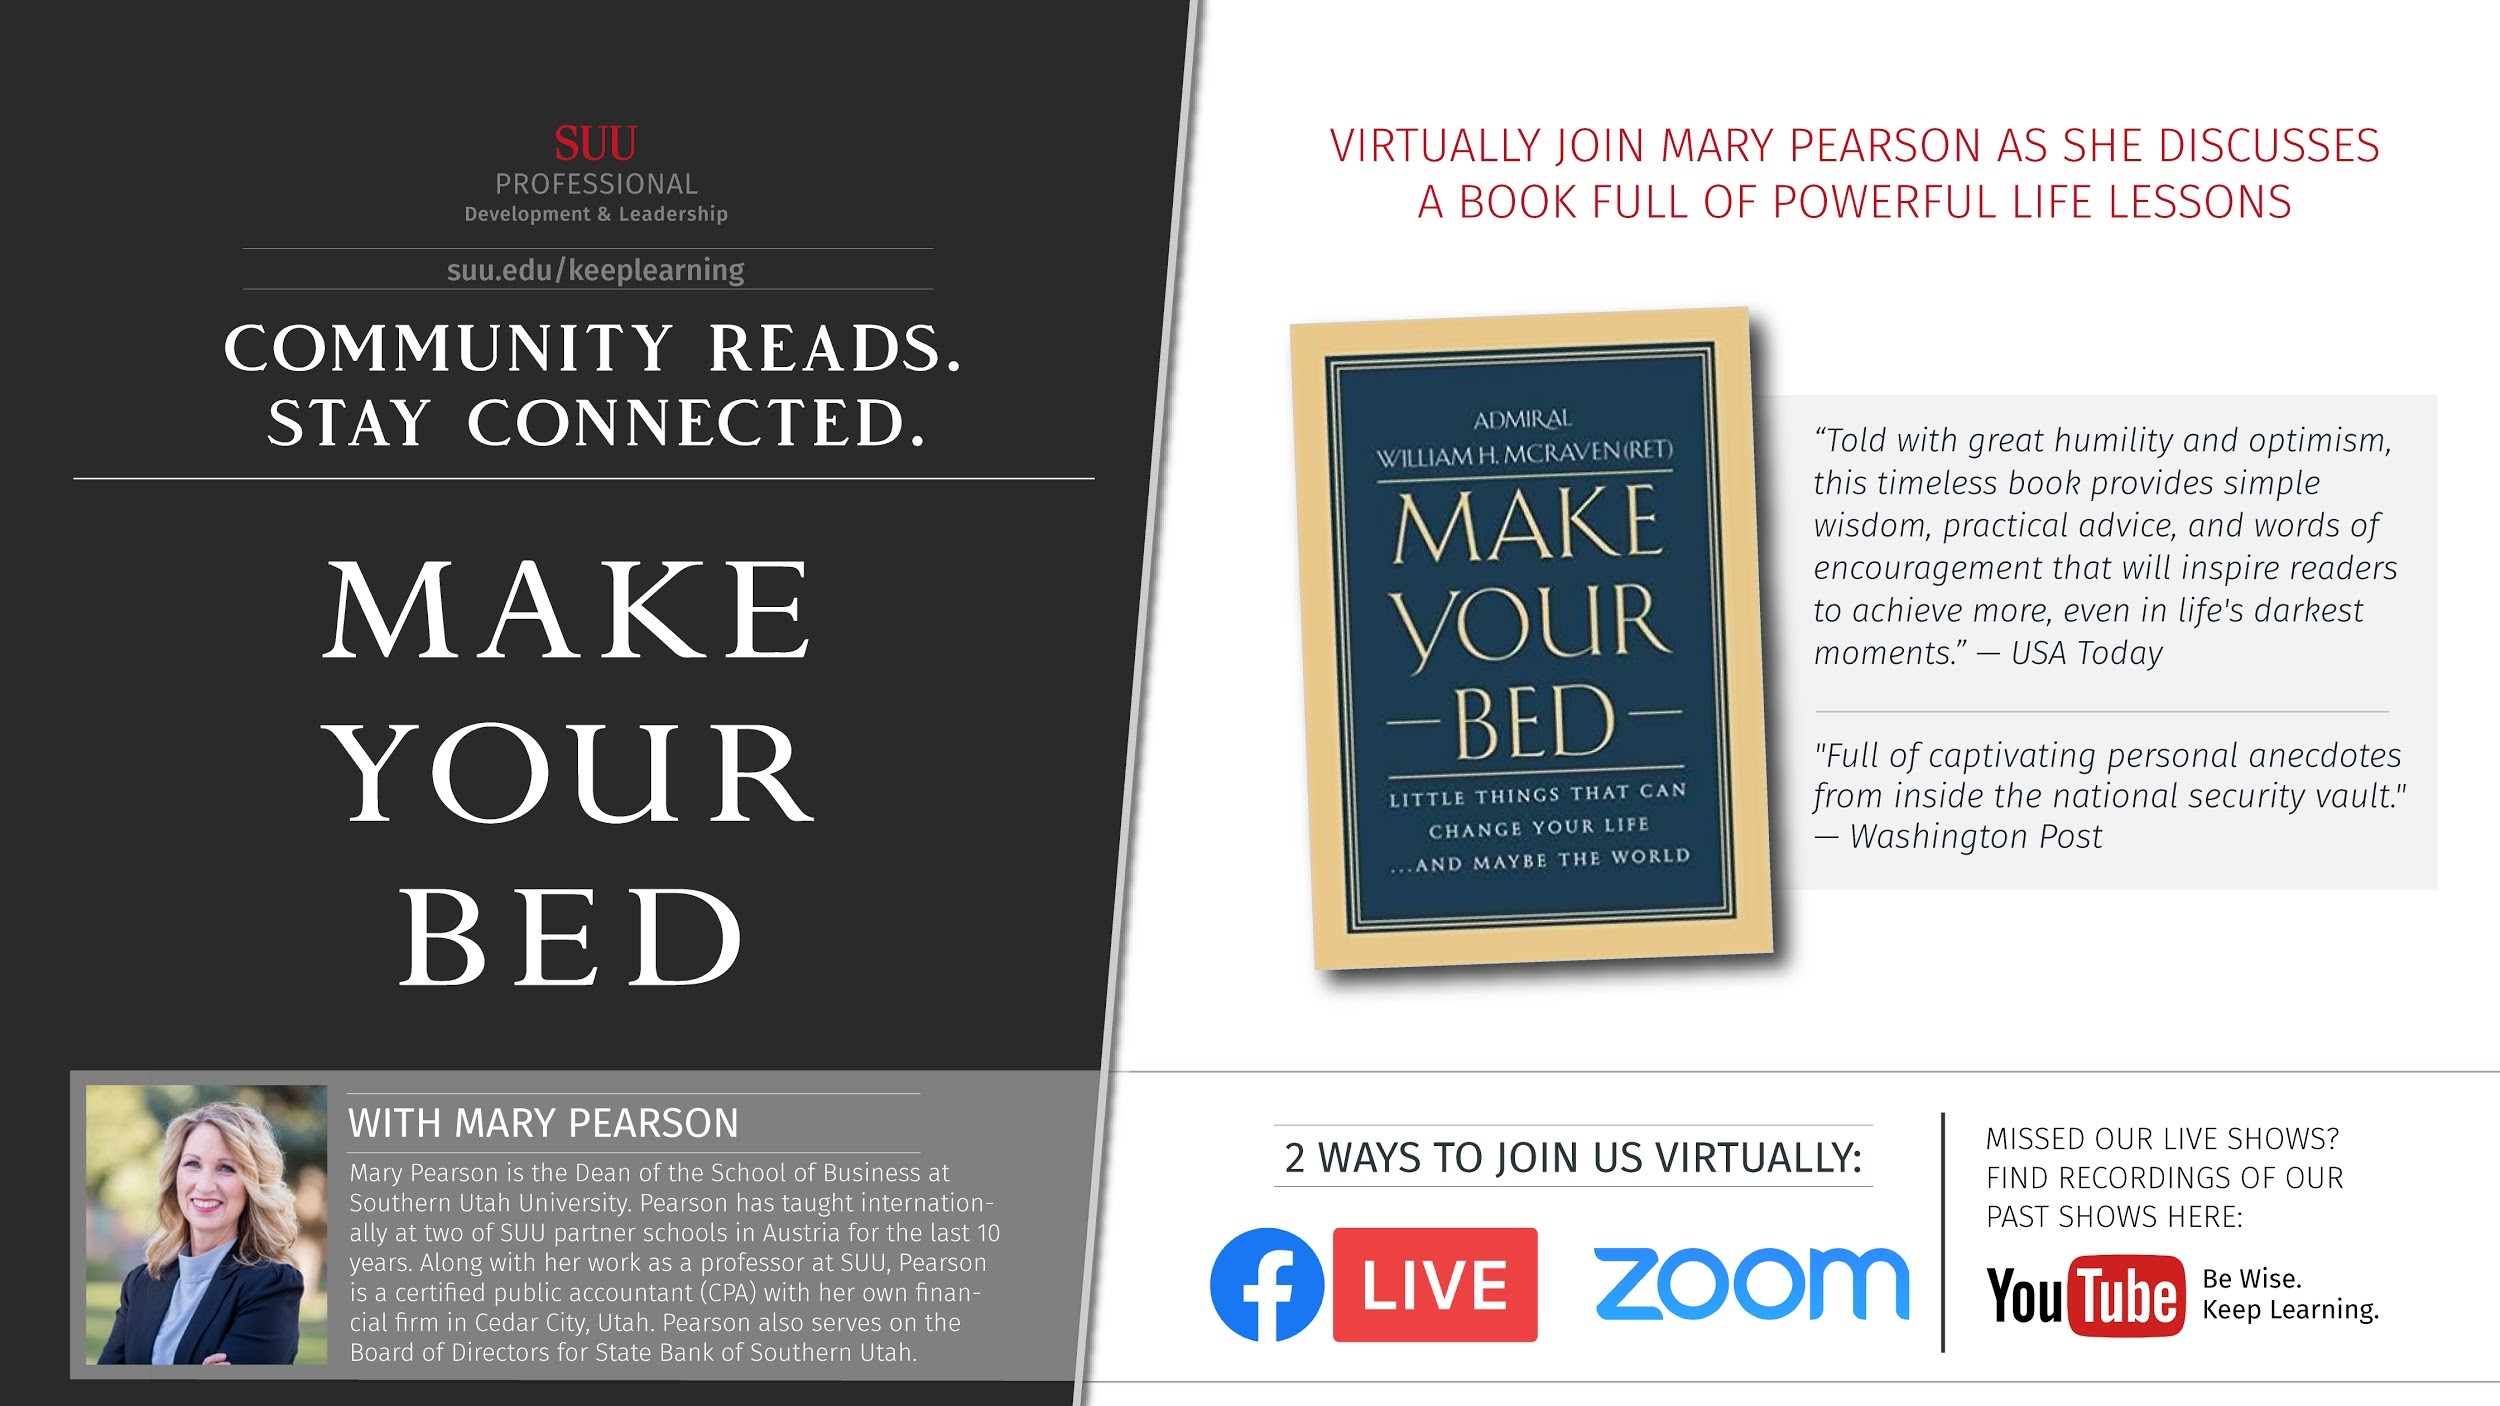 Make Your Bed by Admiral William H. Mcraven (Ret)